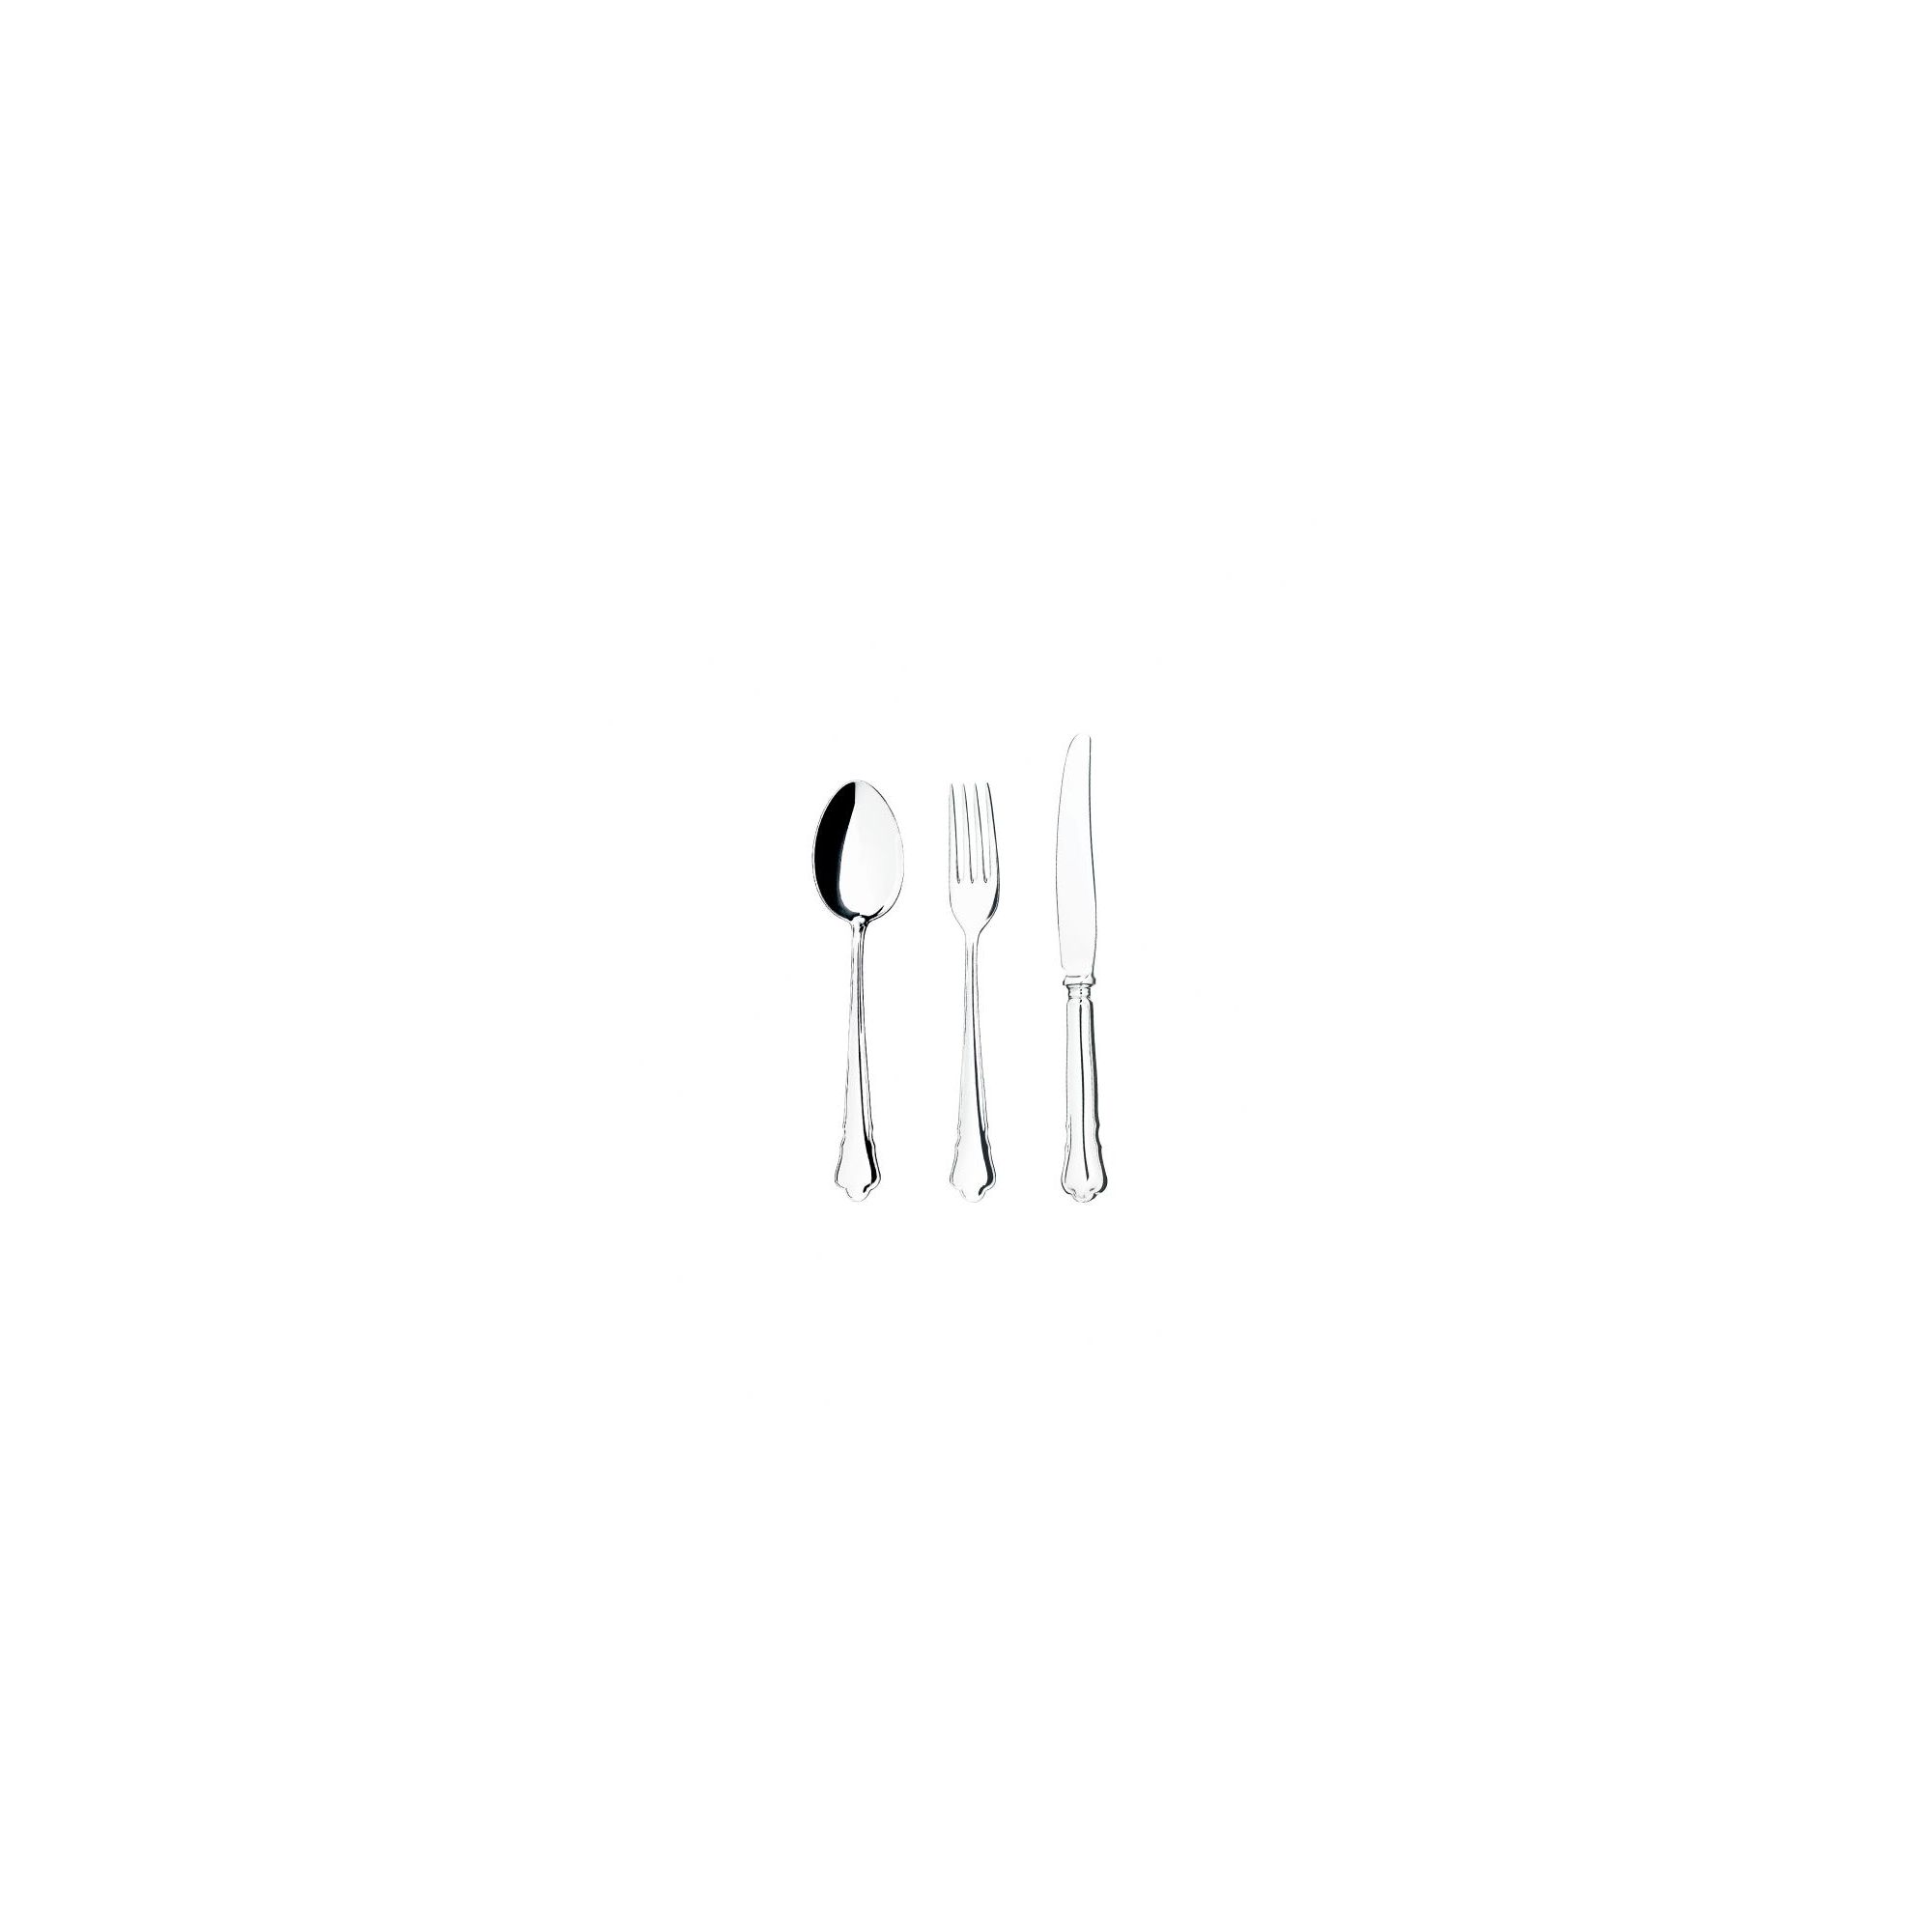 Mema/GAB Chippendale 12 Piece Silver Plated Cutlery Set 1 at Tesco Direct